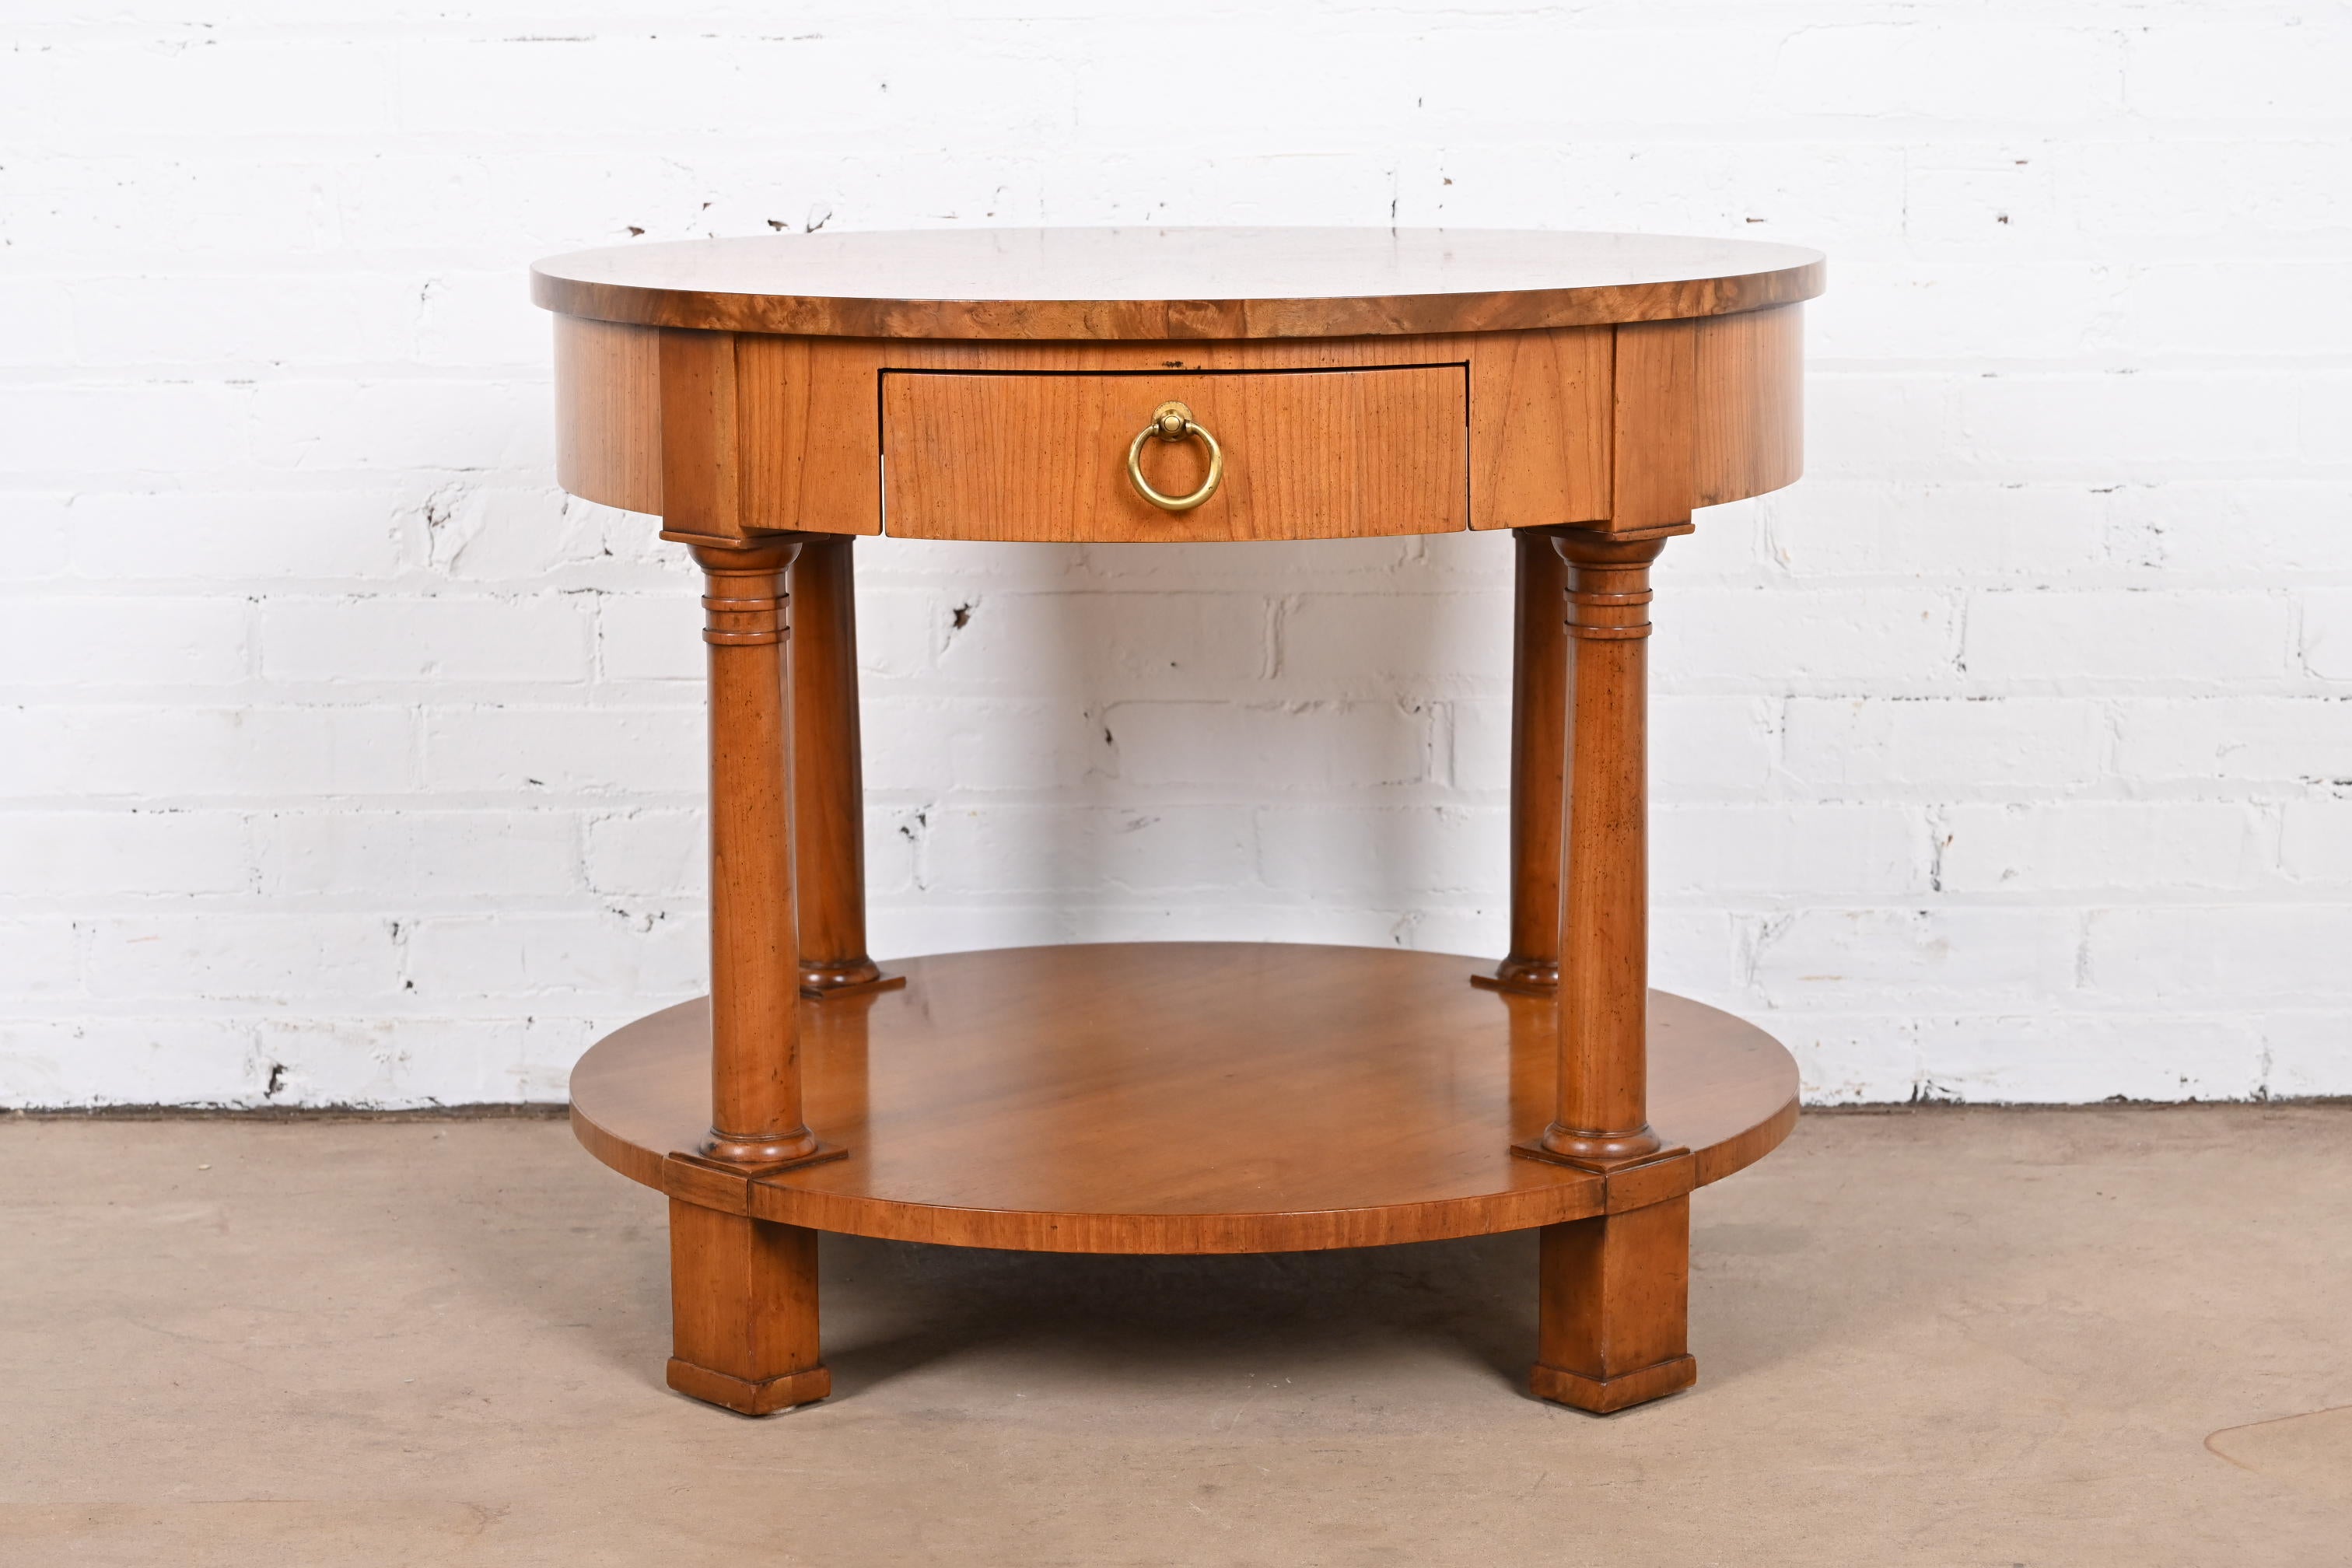 A gorgeous French Empire or Neoclassical style tea table or occasional side table

By Baker Furniture

USA, Circa 1980s

Cherry wood, with burled walnut banding on top and stunning inlaid starburst design.

Measures: 27